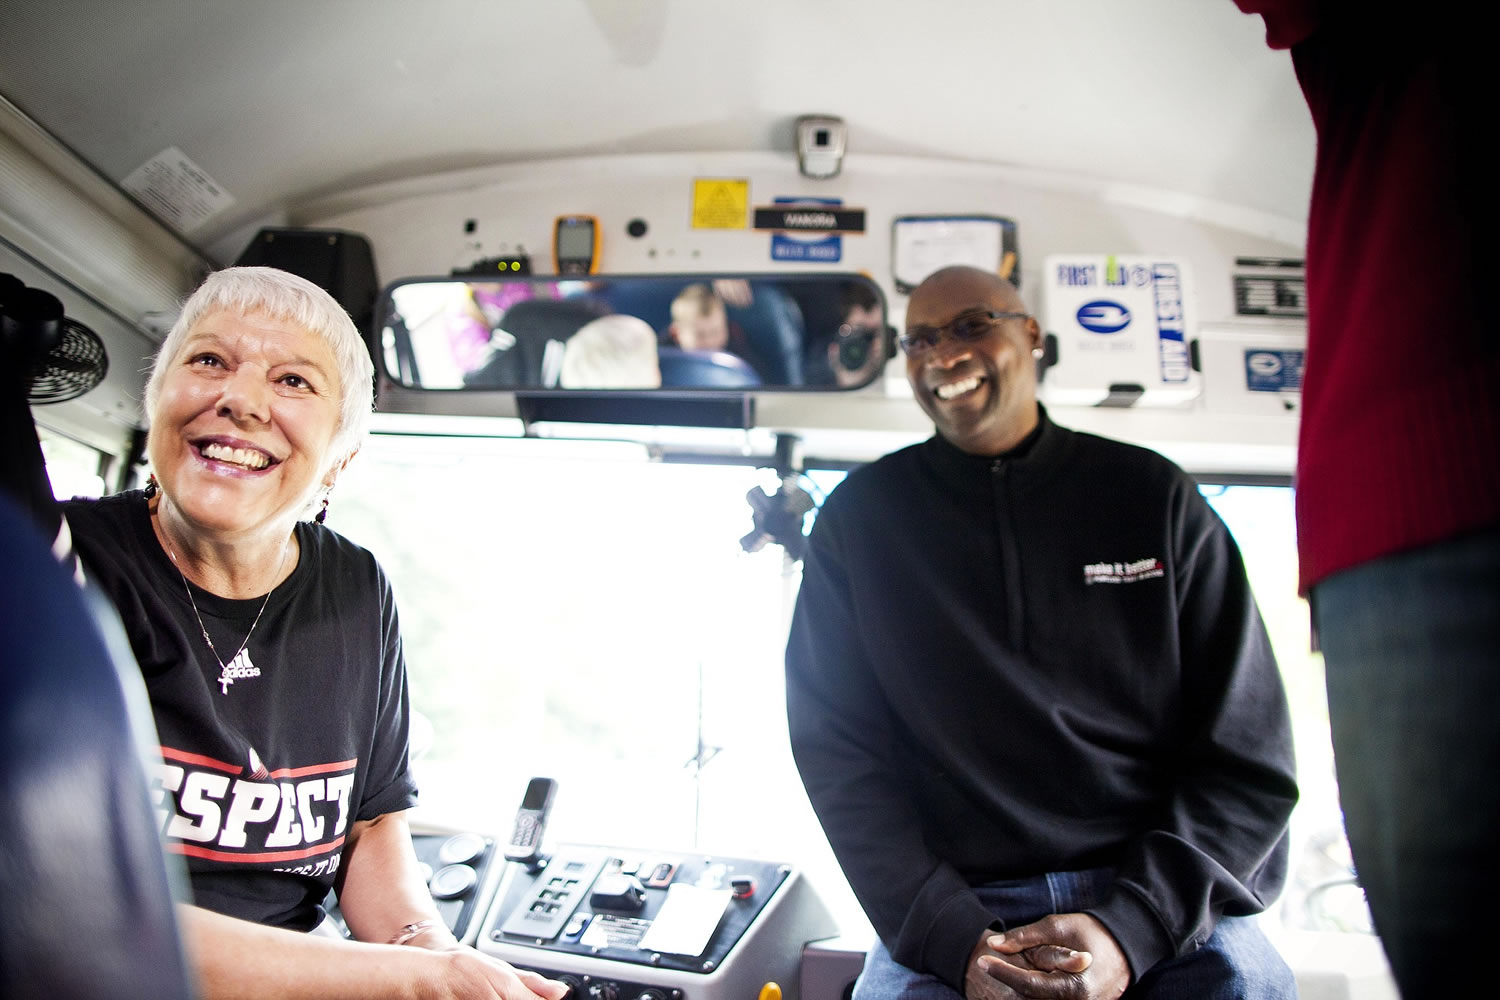 Vanora Volk, left, a bus driver for Vancouver Public Schools, gets a visit with former Portland Trail Blazer Jerome Kersey on her bus as she is honored for demonstrating the spirit of Damian Lillard's &quot;Respect, Pass It On&quot; program.